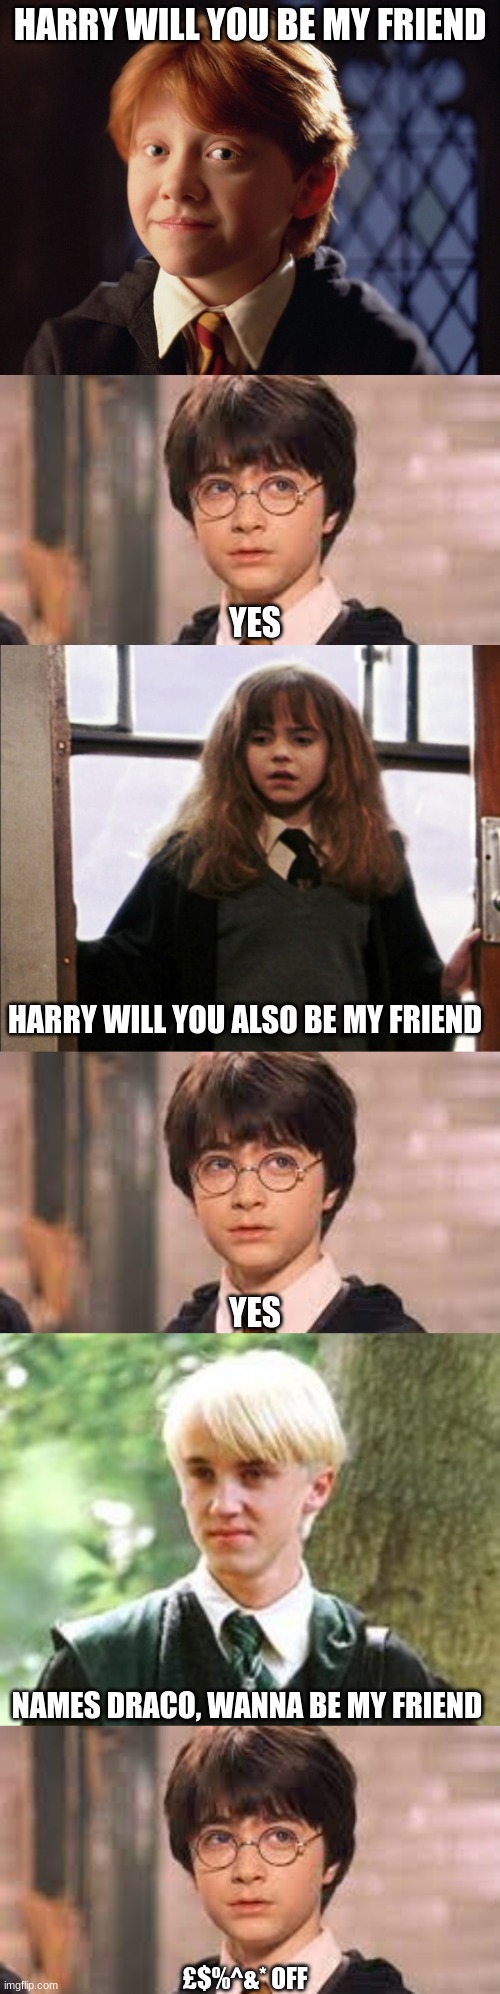 will you be my friend | HARRY WILL YOU BE MY FRIEND; YES; HARRY WILL YOU ALSO BE MY FRIEND; YES; NAMES DRACO, WANNA BE MY FRIEND; £$%^&* OFF | image tagged in ron weasley | made w/ Imgflip meme maker